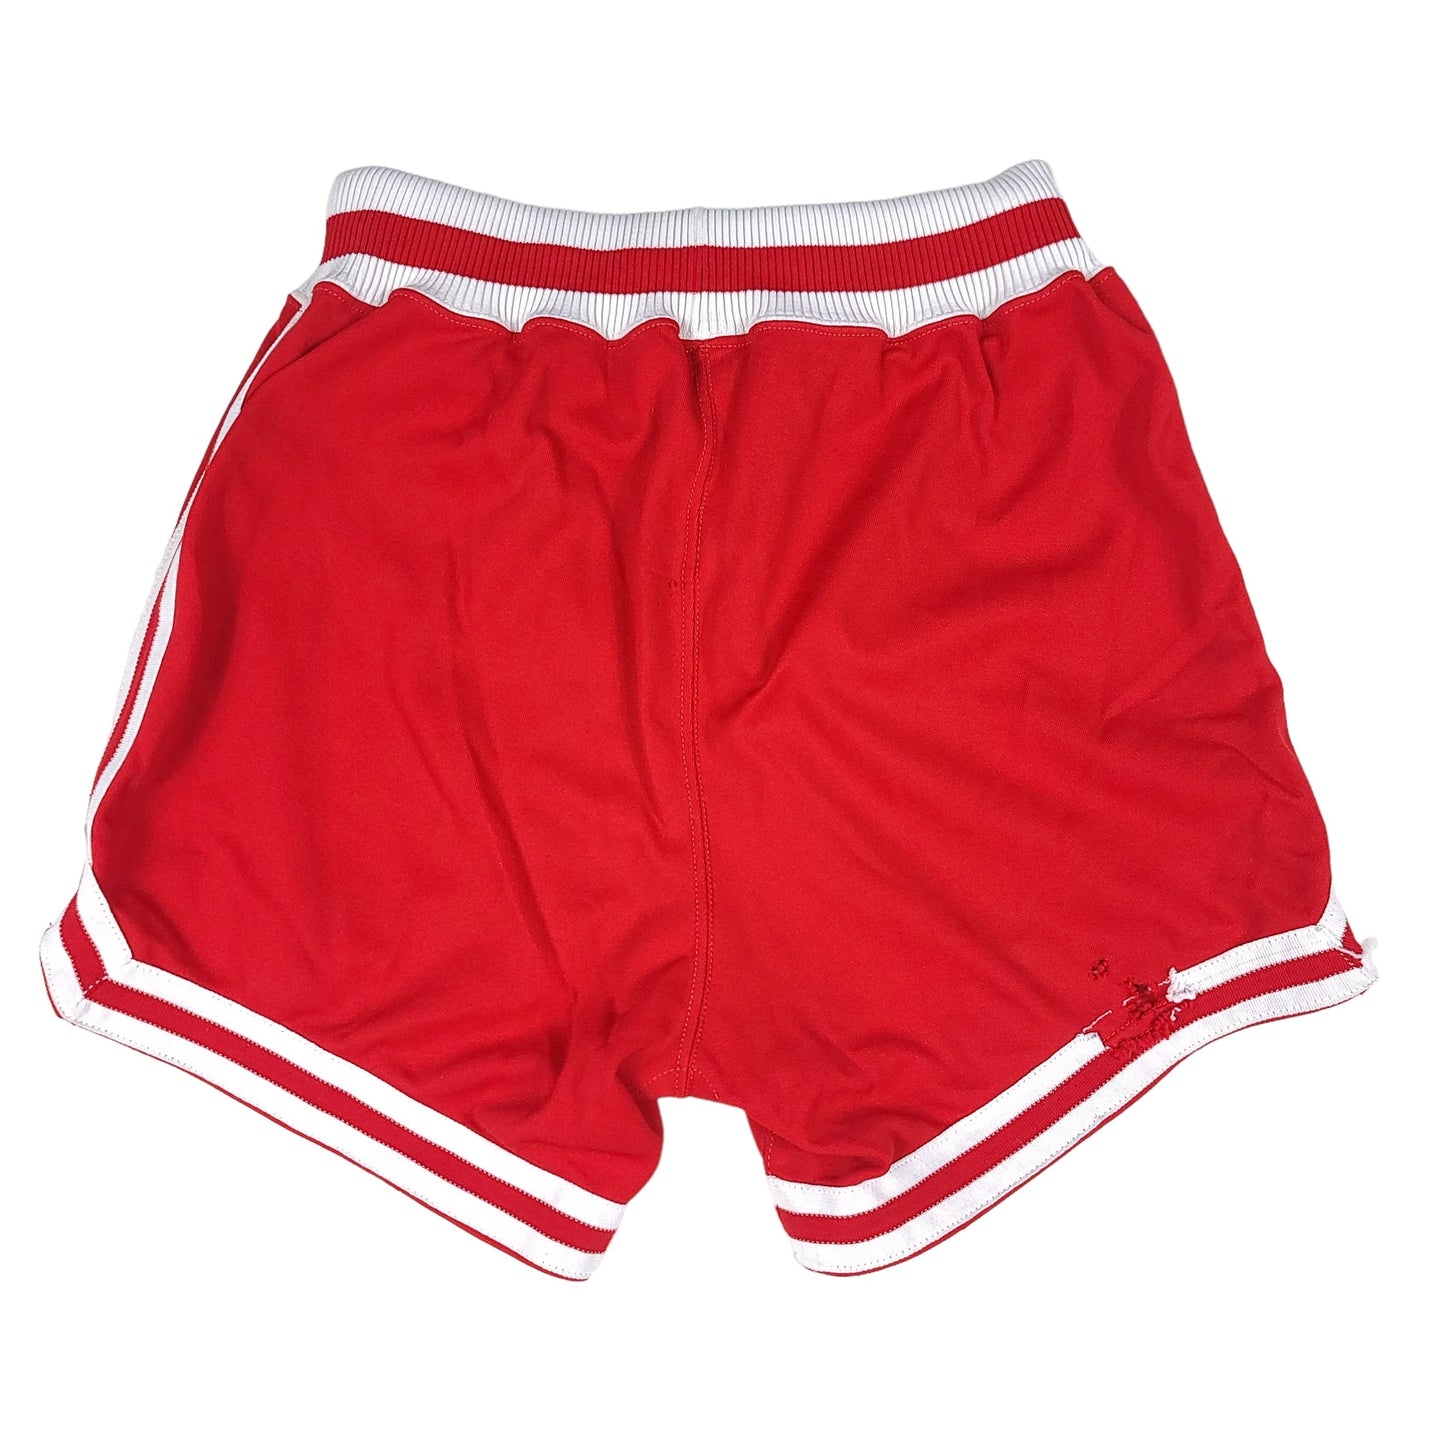 Vintage Lady Champion Red Athletic Shorts